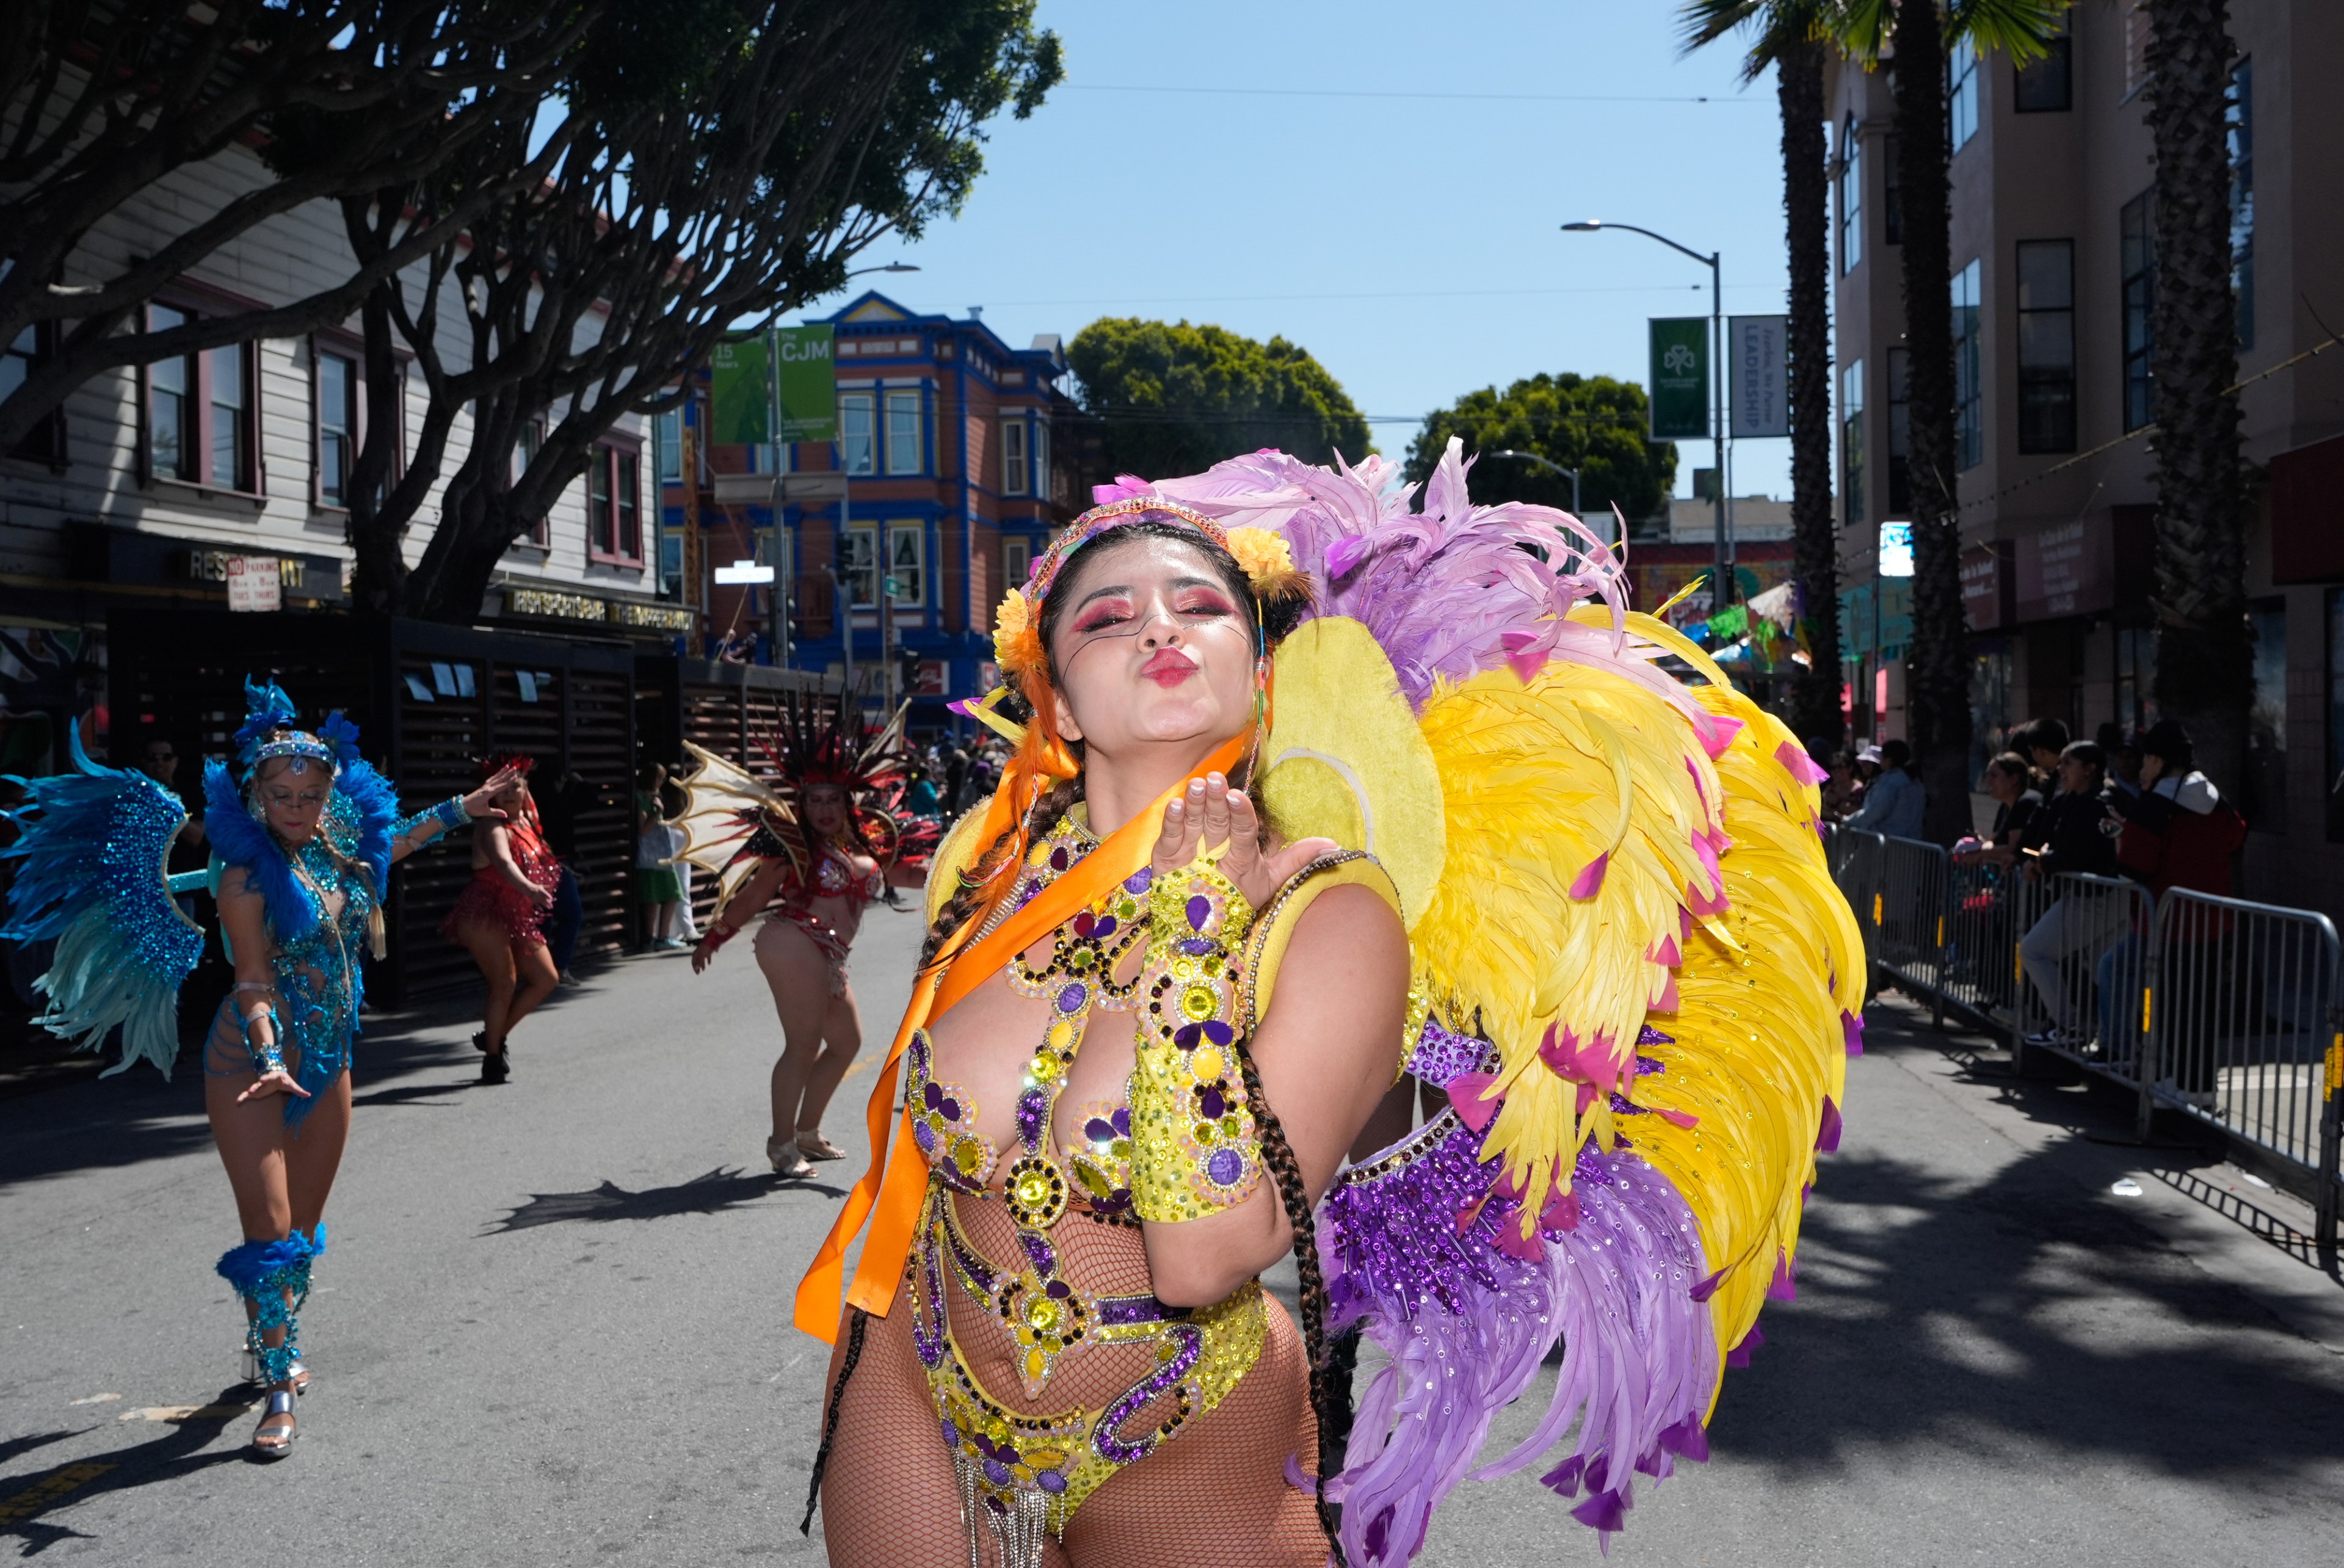 A woman in colorful, feathered costume blows a kiss at a street parade. Others in vibrant outfits and large feathered headdresses dance in the background.